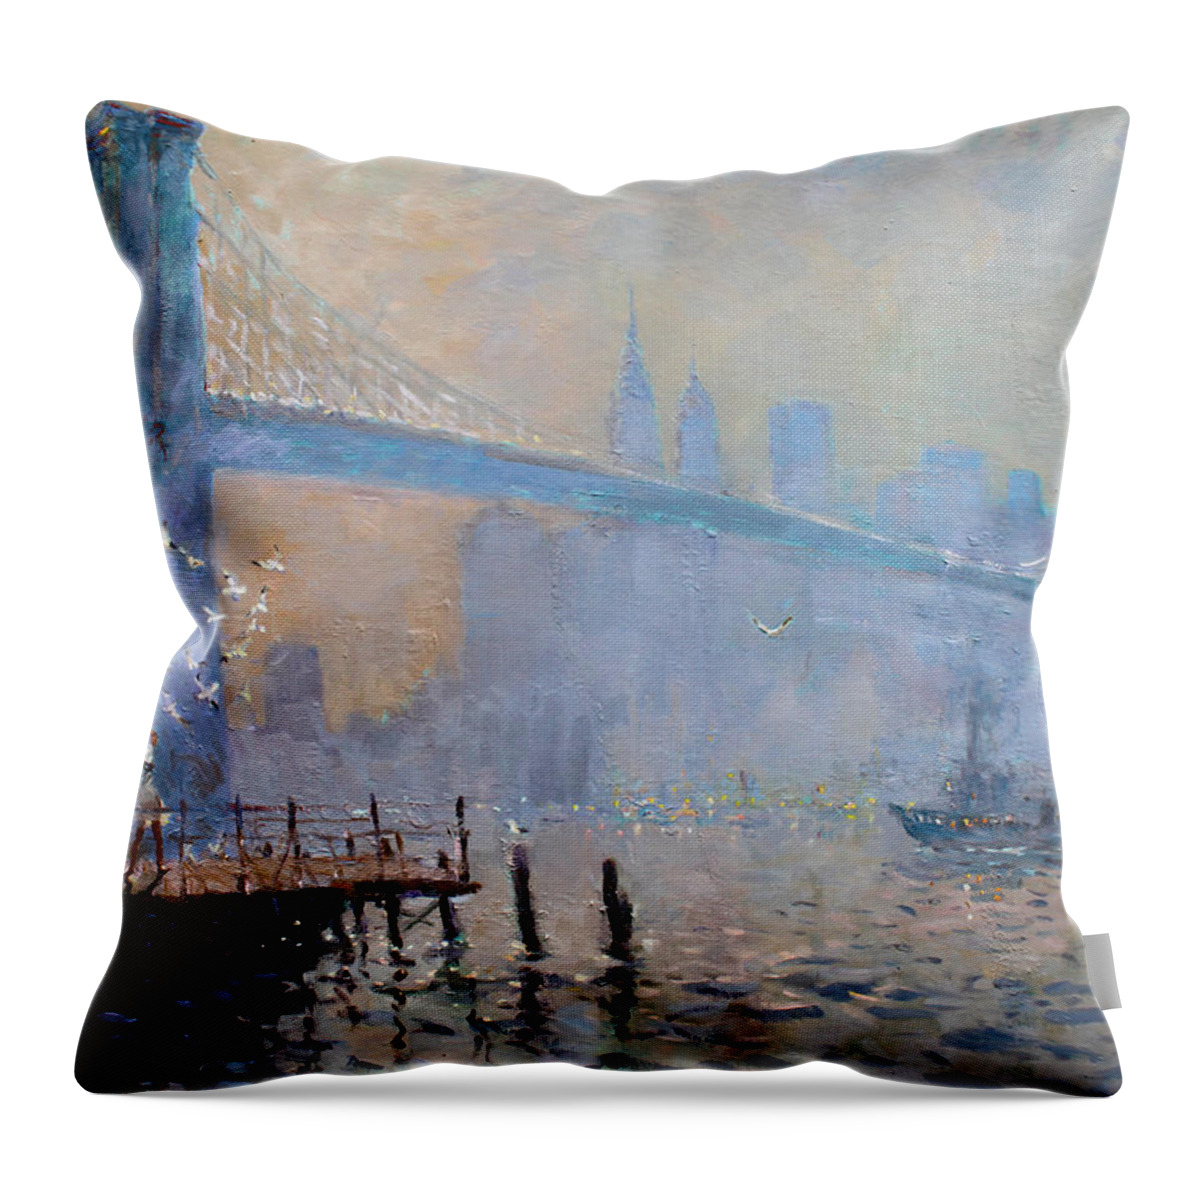 Seagulls Throw Pillow featuring the painting Erbora and the Seagulls by Ylli Haruni